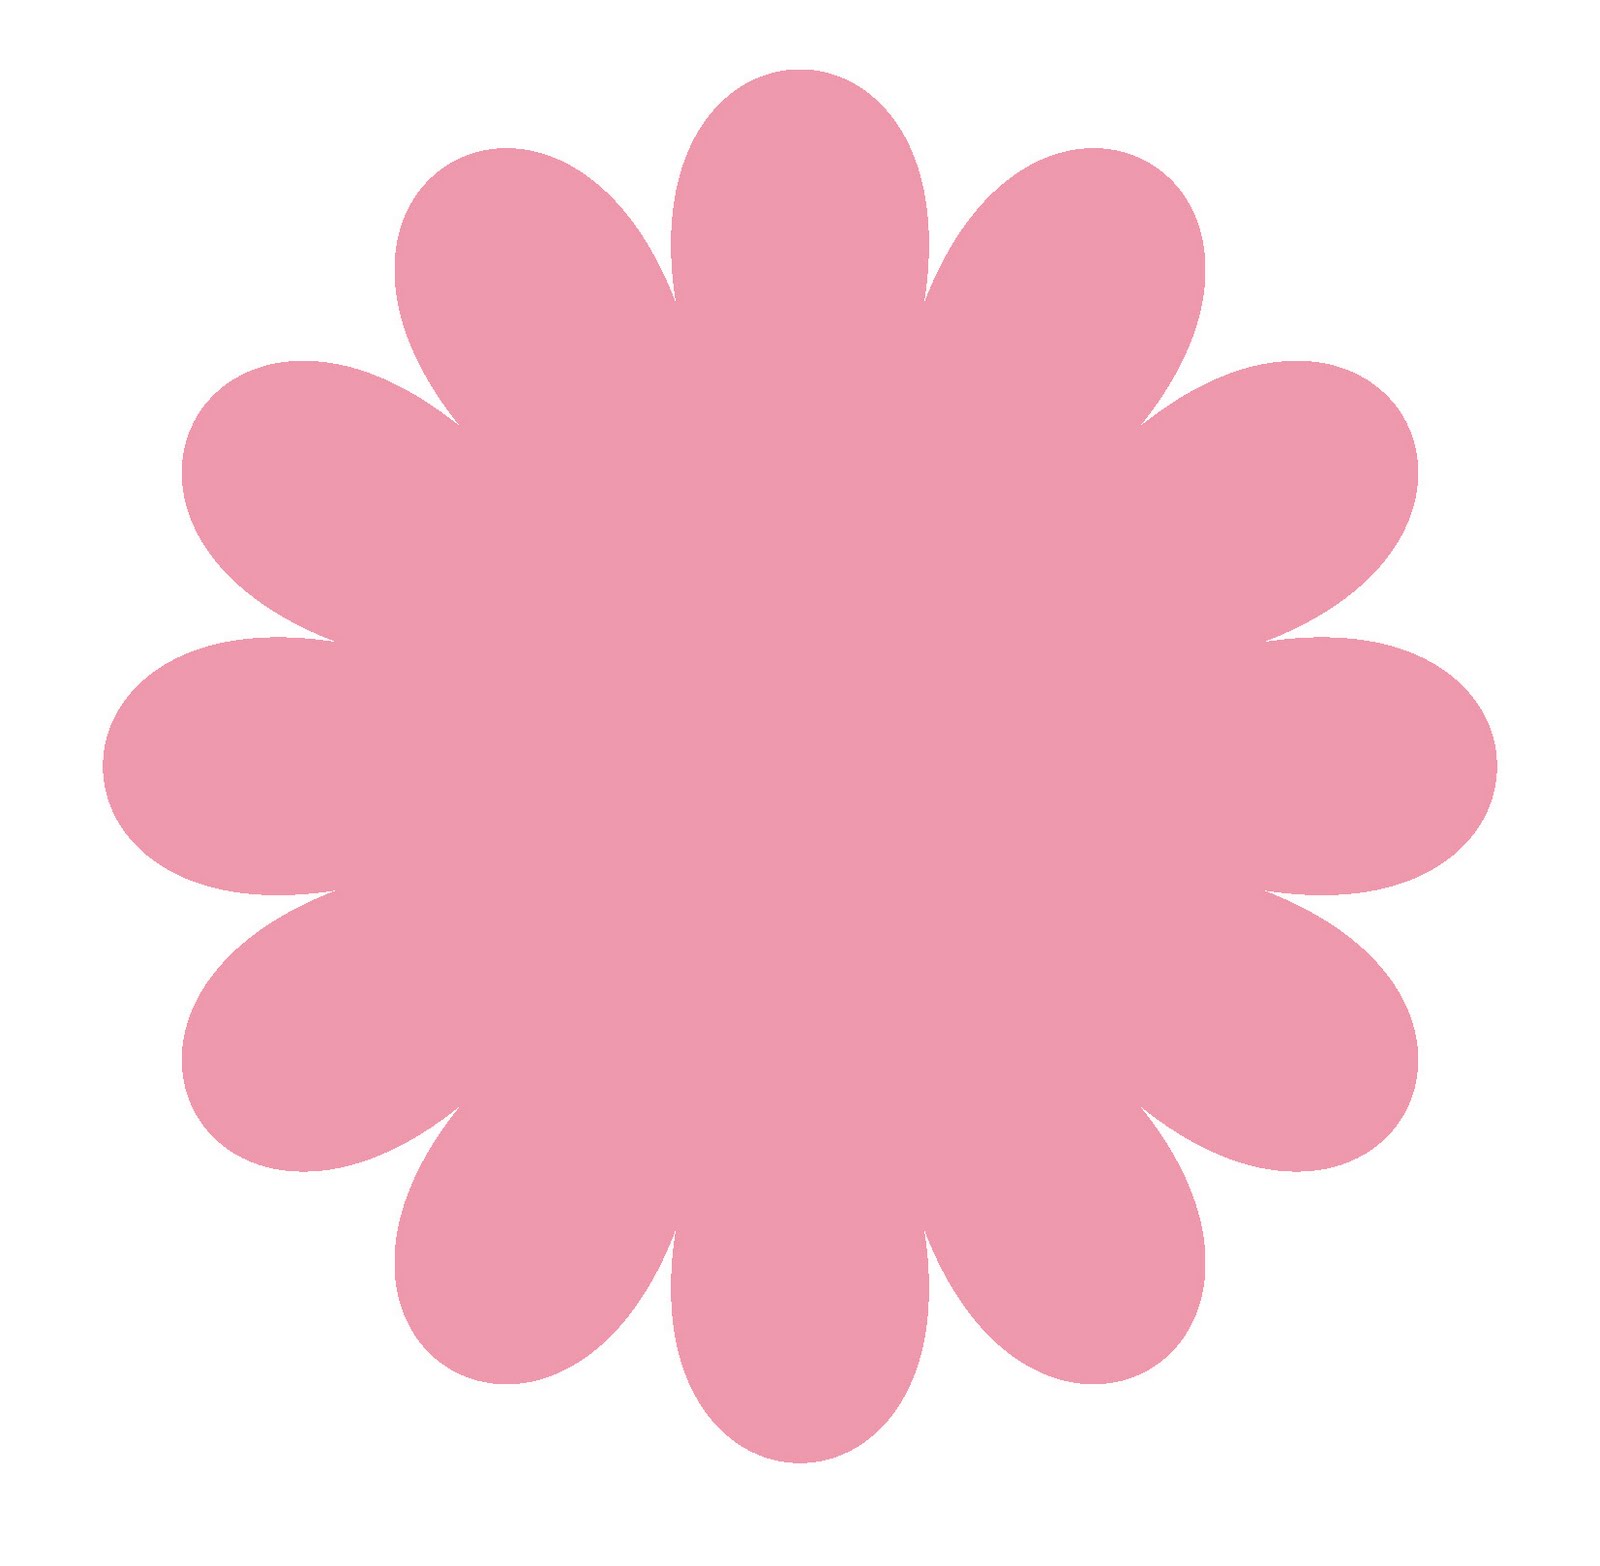 Free Flower Shapes Cliparts, Download Free Clip Art, Free.